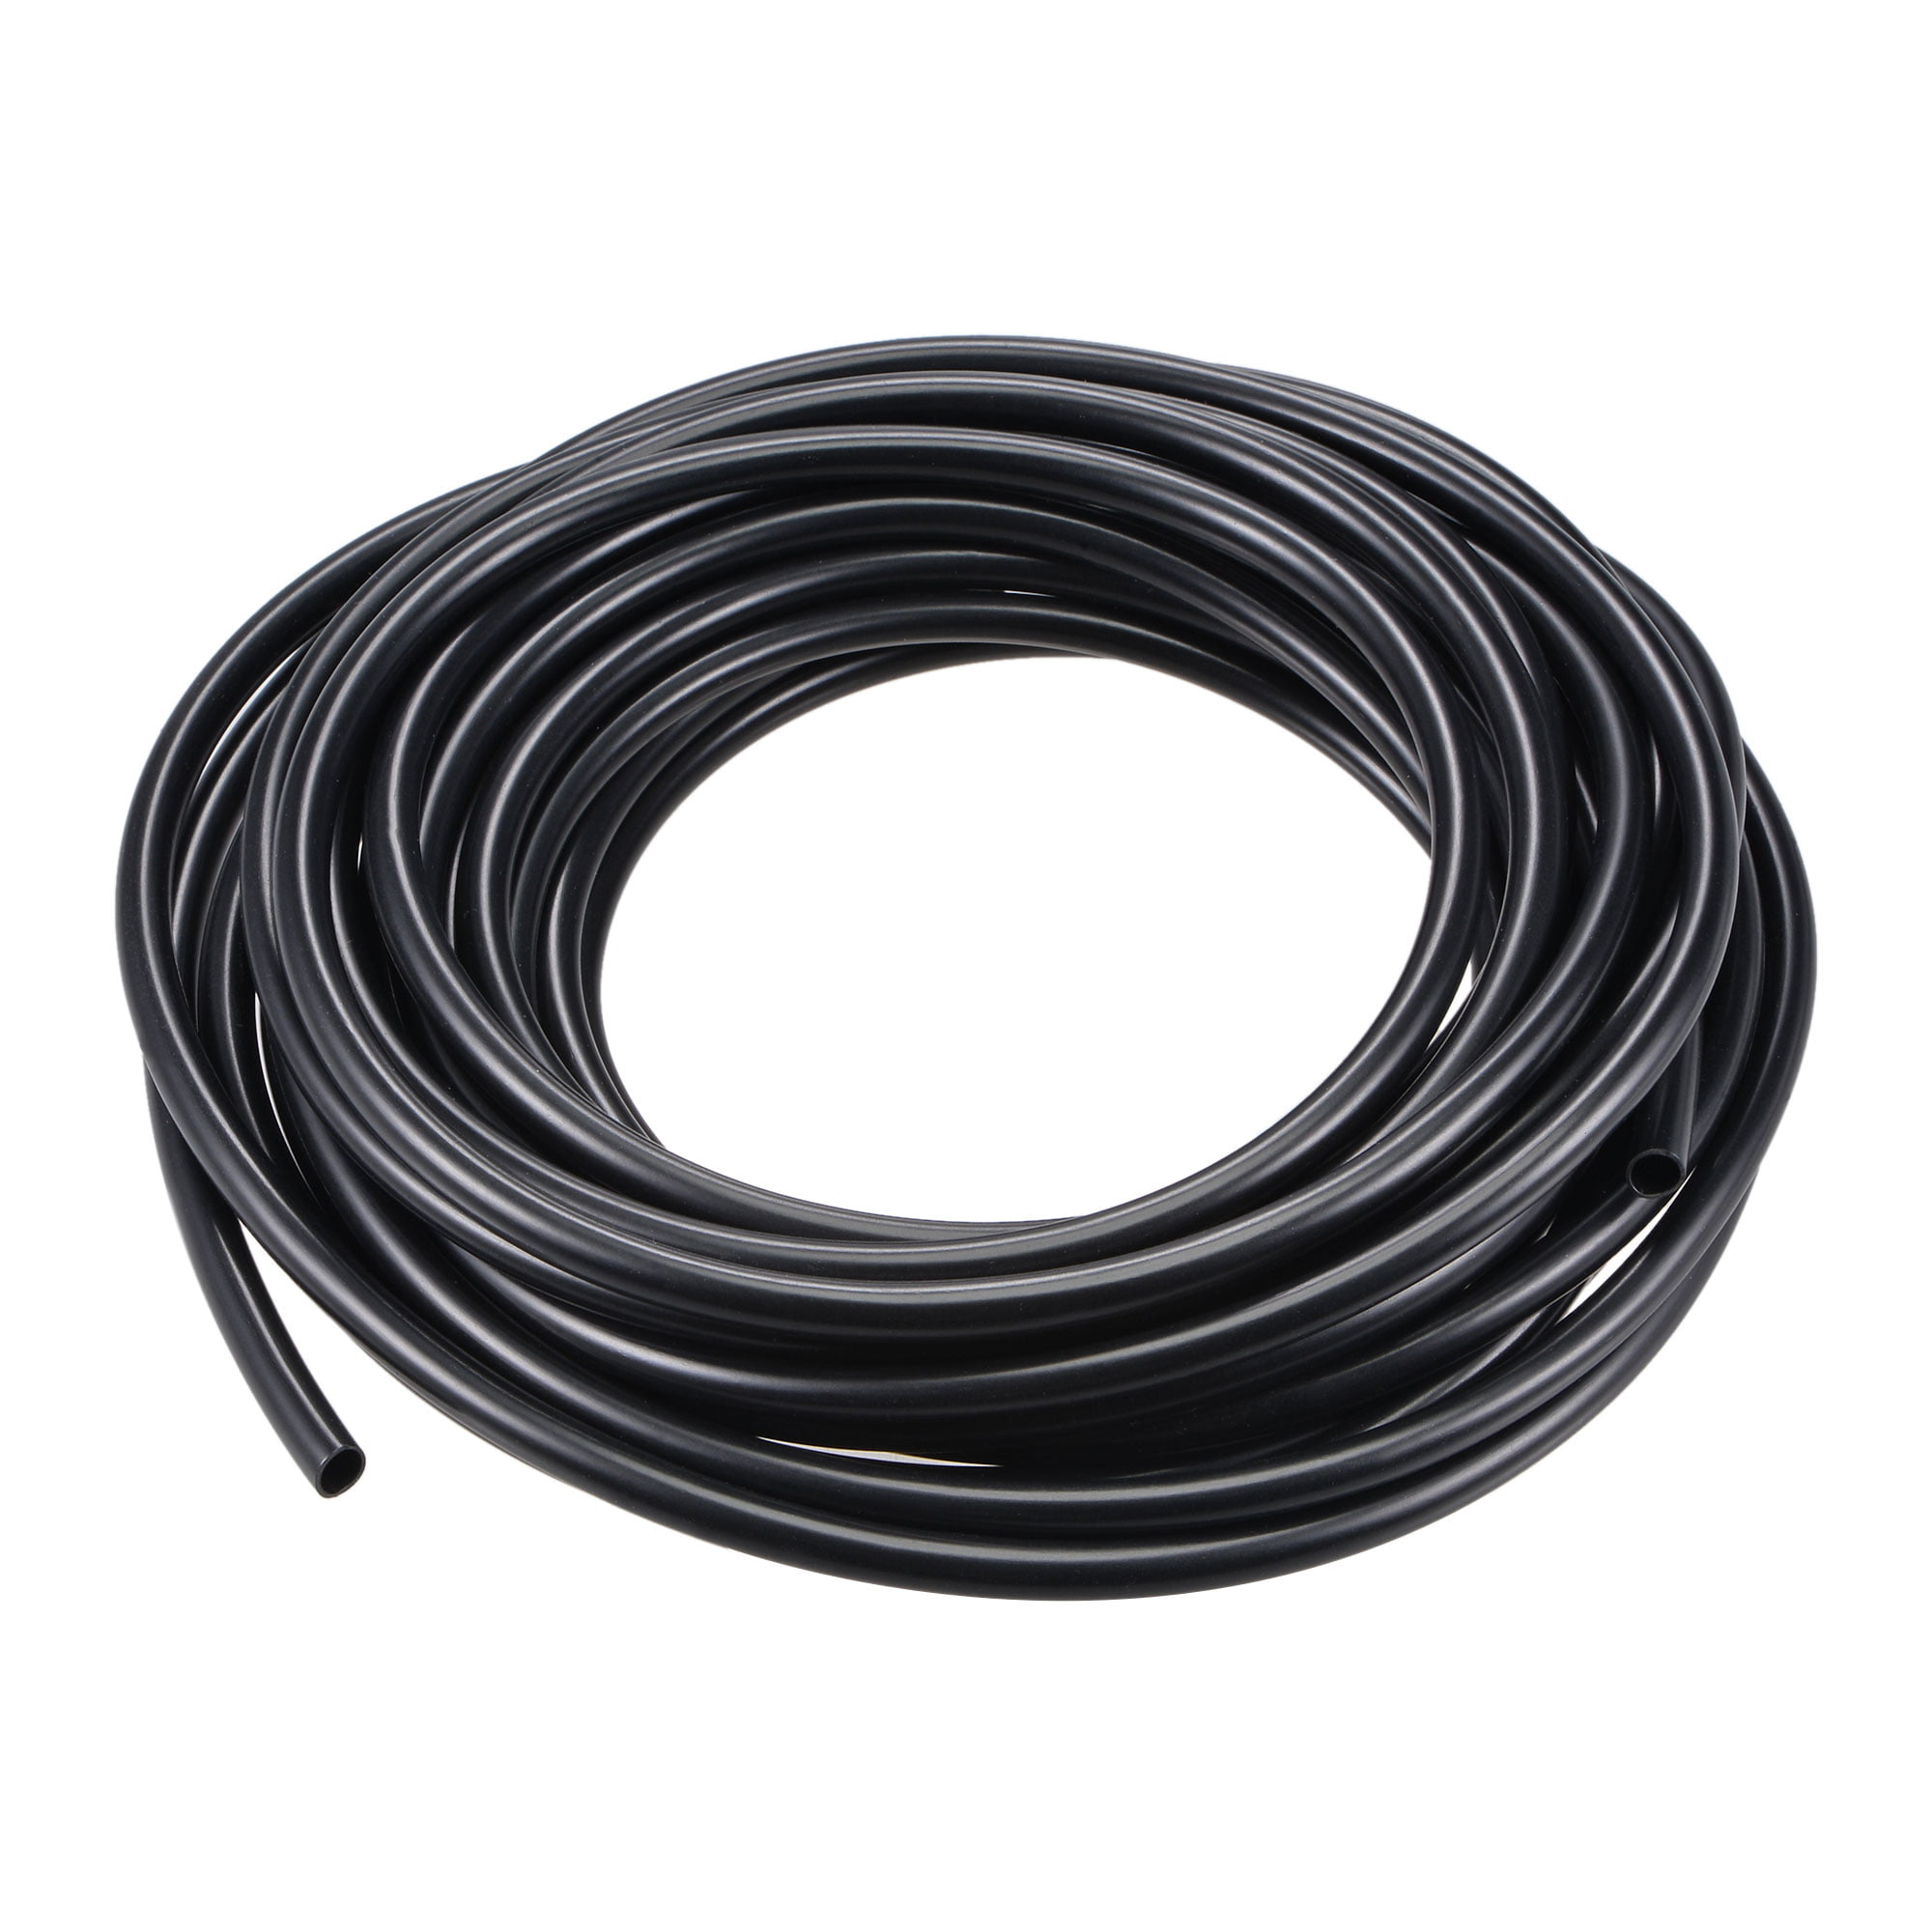 5/32" ID 23ft Sleeve for Wire Sheathing Details about   Black PVC Tube Wire Harness Tubing 